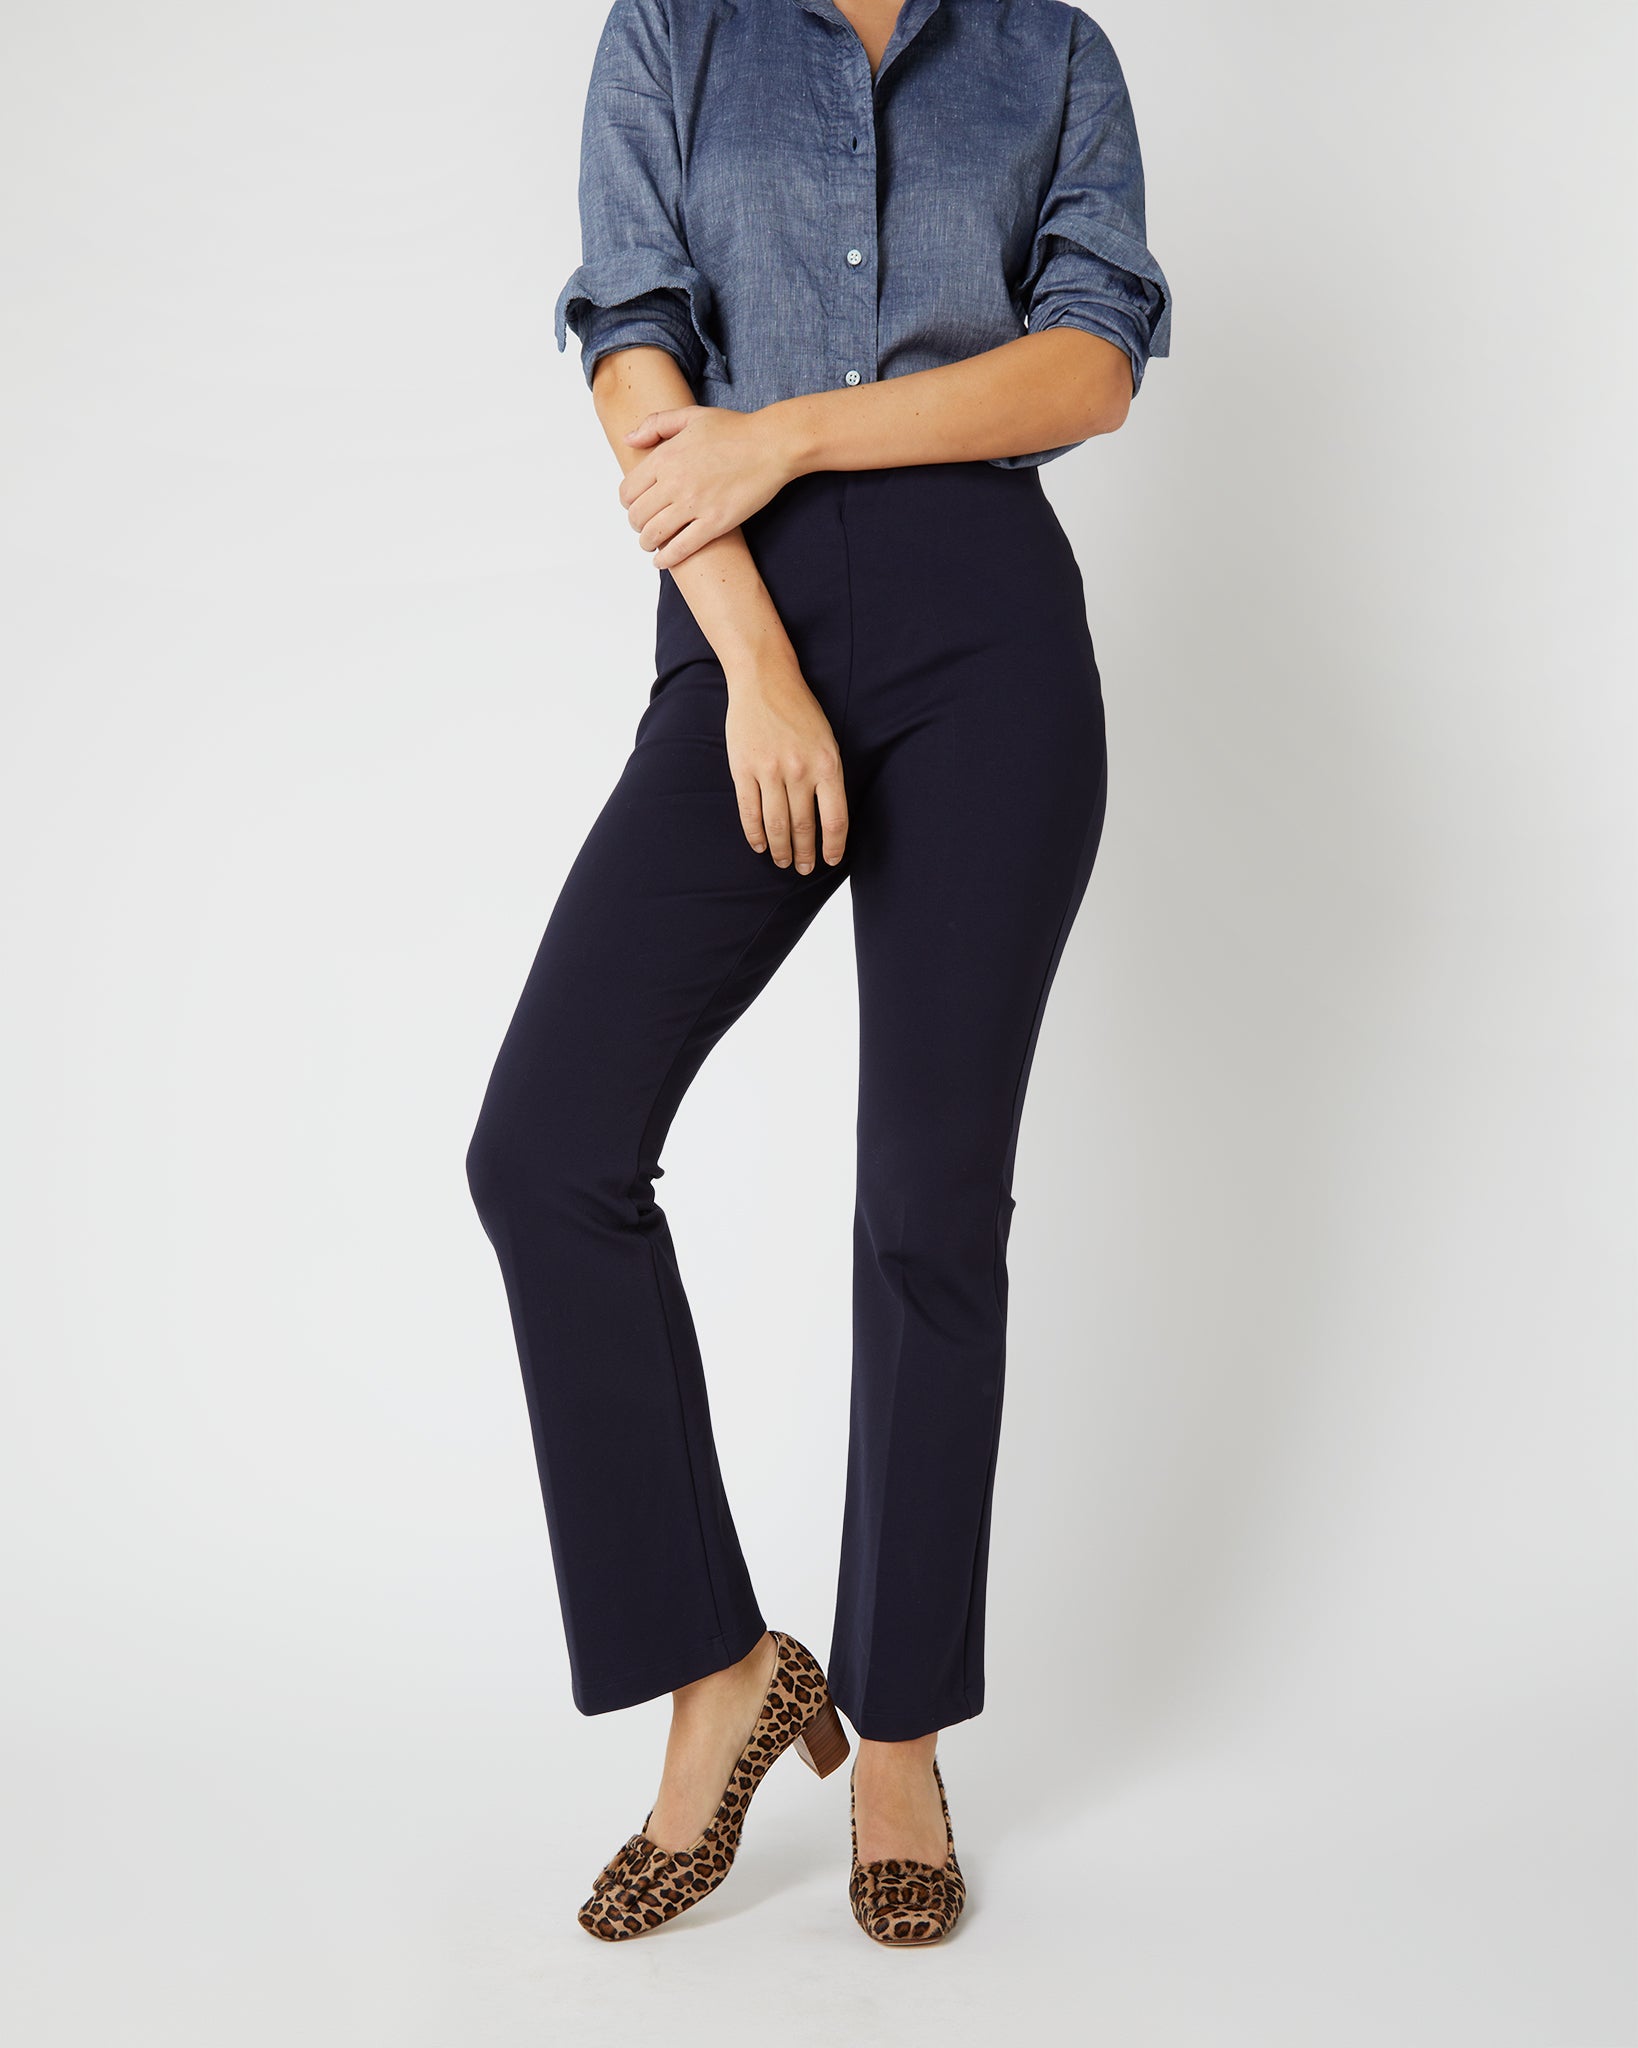 Faye Flare Cropped Pant in Navy Ponte Knit